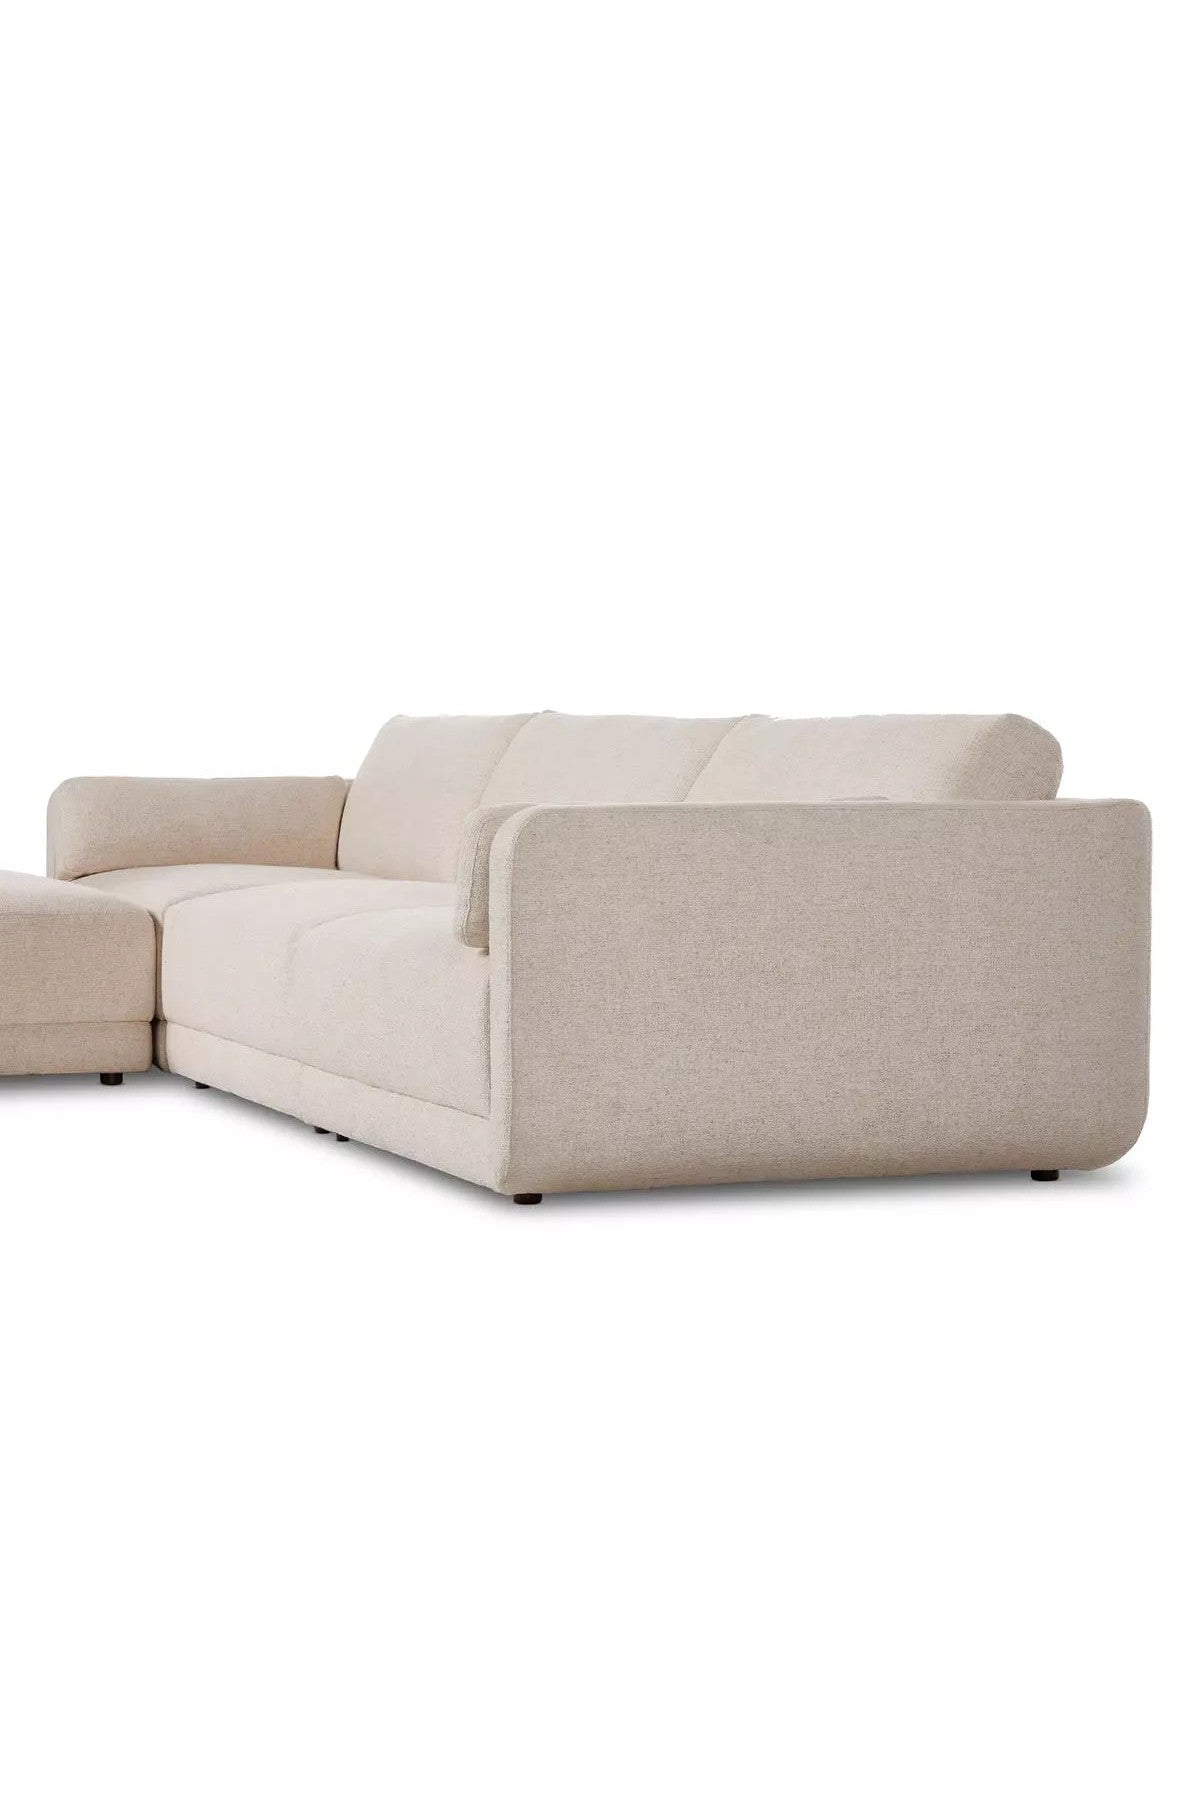 Ovation Sectional